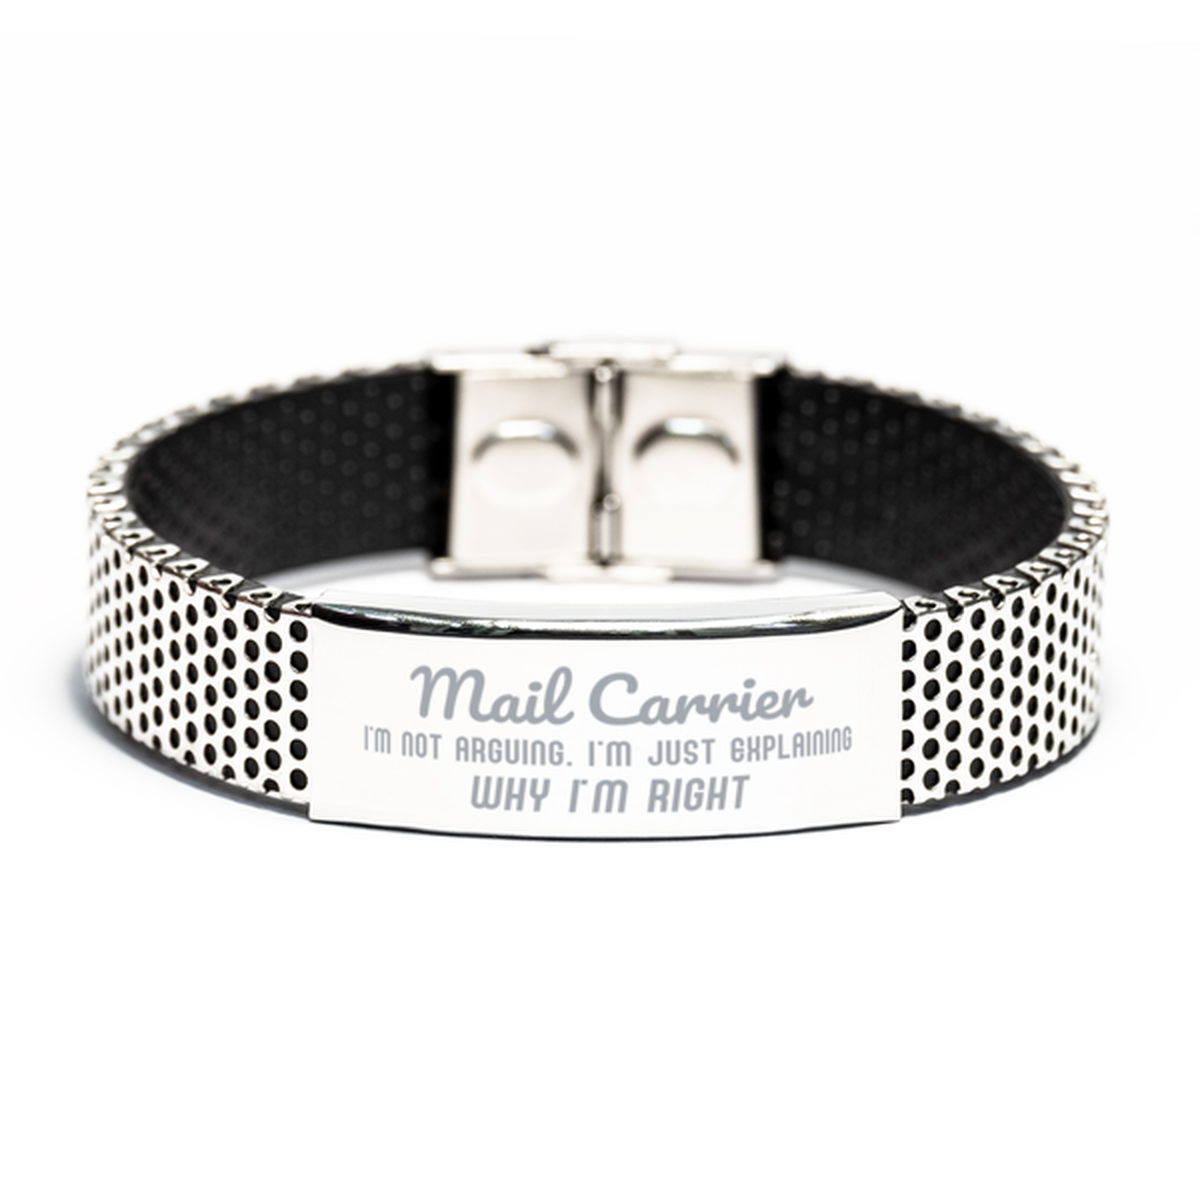 Mail Carrier I'm not Arguing. I'm Just Explaining Why I'm RIGHT Stainless Steel Bracelet, Funny Saying Quote Mail Carrier Gifts For Mail Carrier Graduation Birthday Christmas Gifts for Men Women Coworker